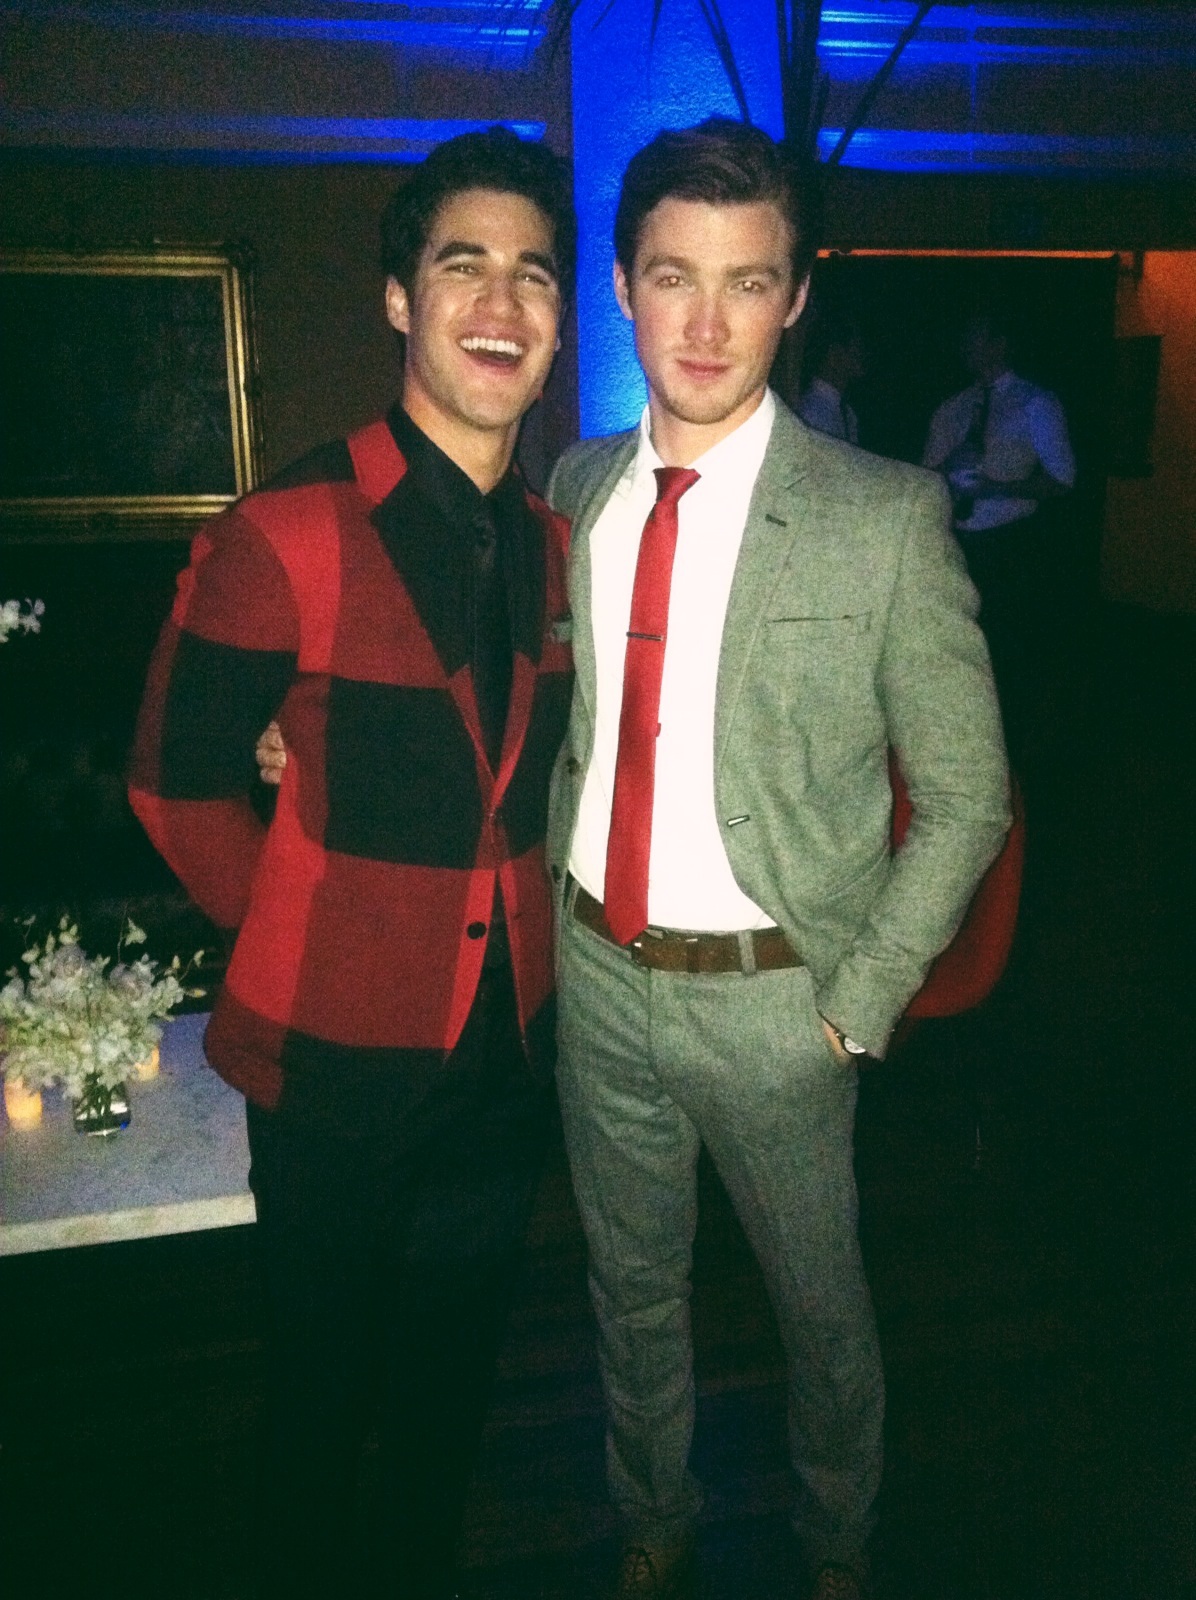 Jeremy Matthew Smith and Darren Criss at the GQ Men of the Year party - November 2013